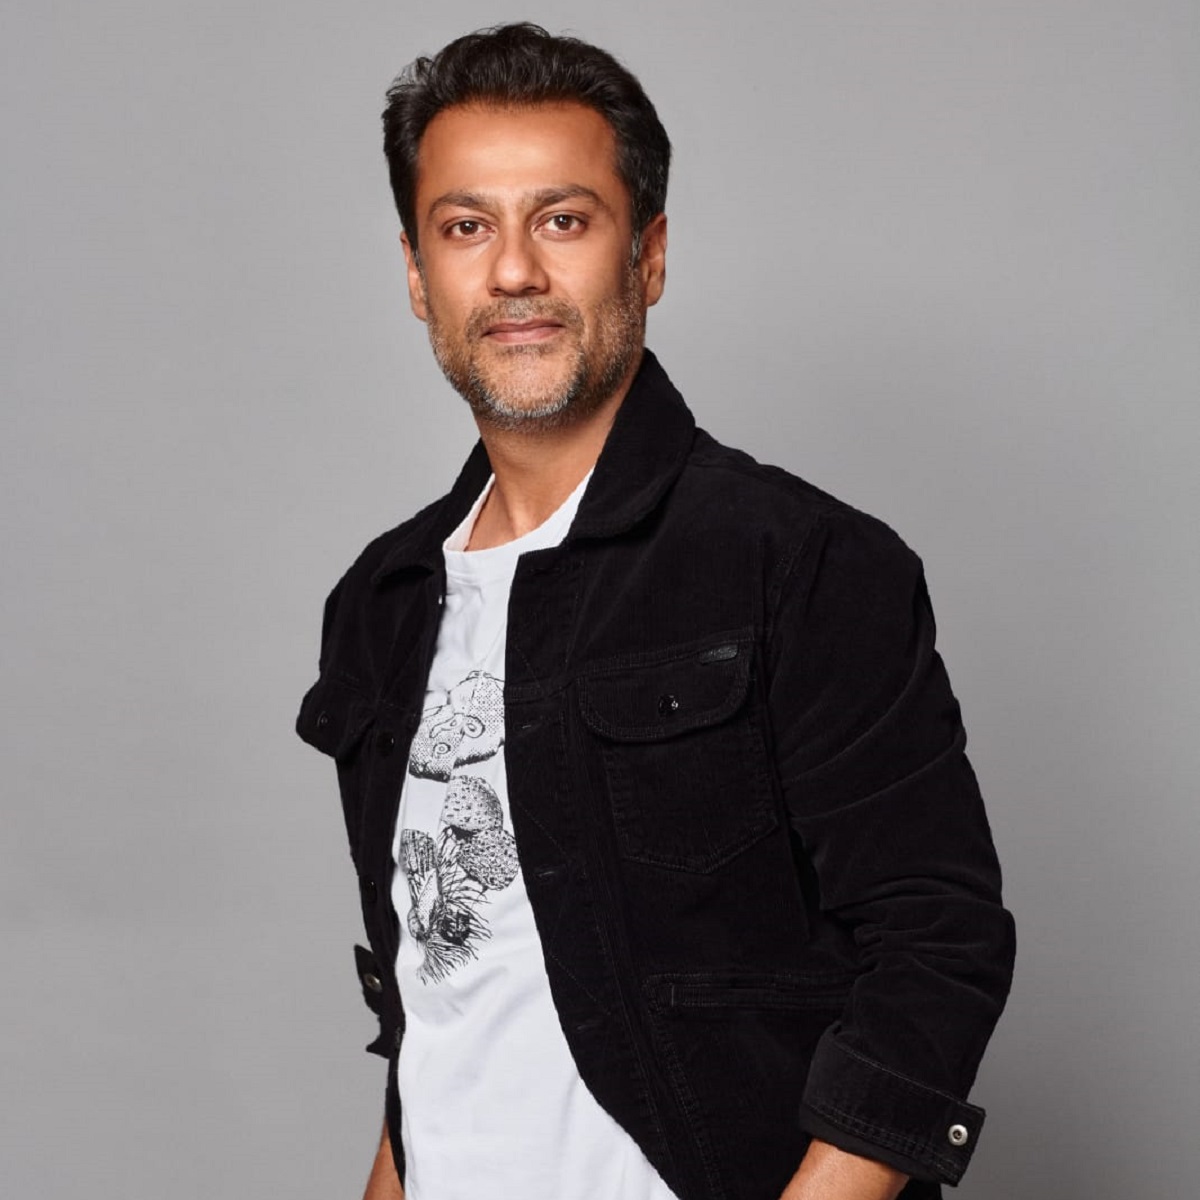 INTERVIEW: Abhishek Kapoor on Chandigarh Kare Aashiqui, &amp; 15 years in B&#039;wood: ‘Wish I had directed more films’